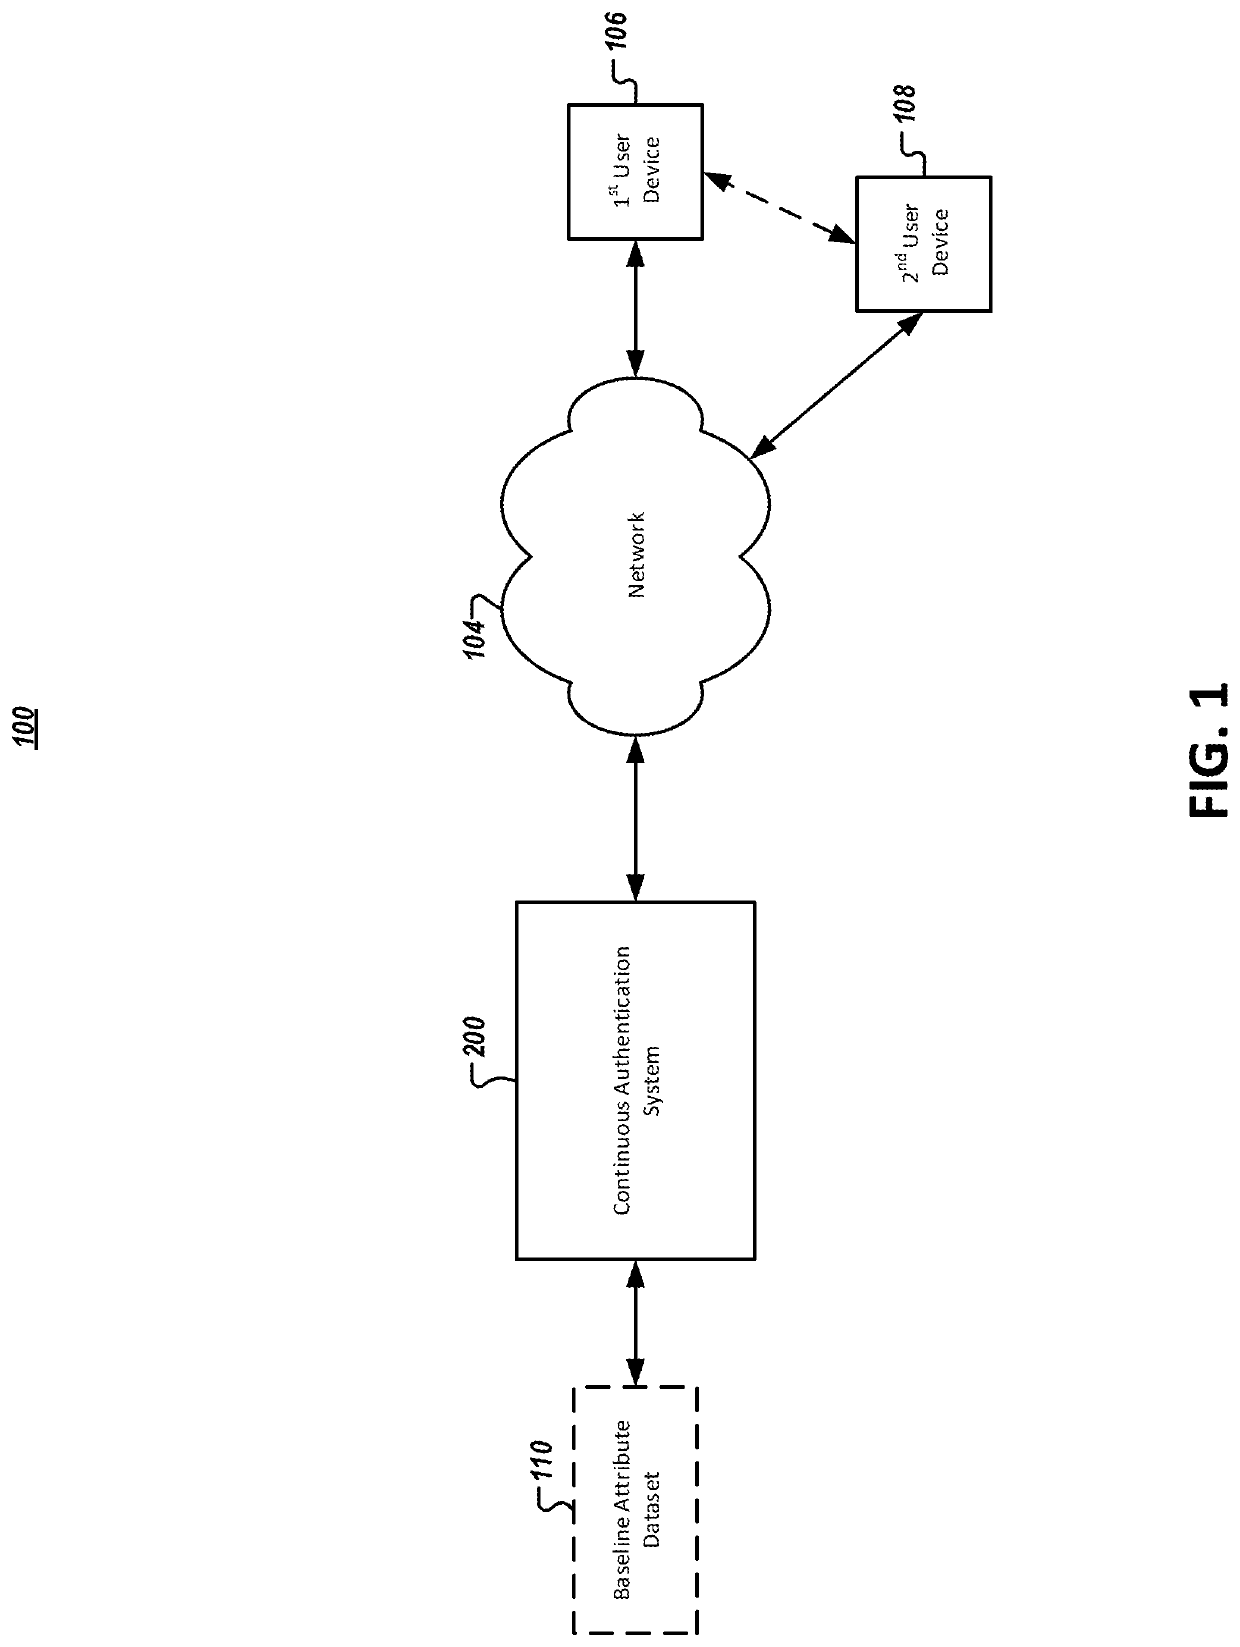 Systems and methods for securely migrating data between devices